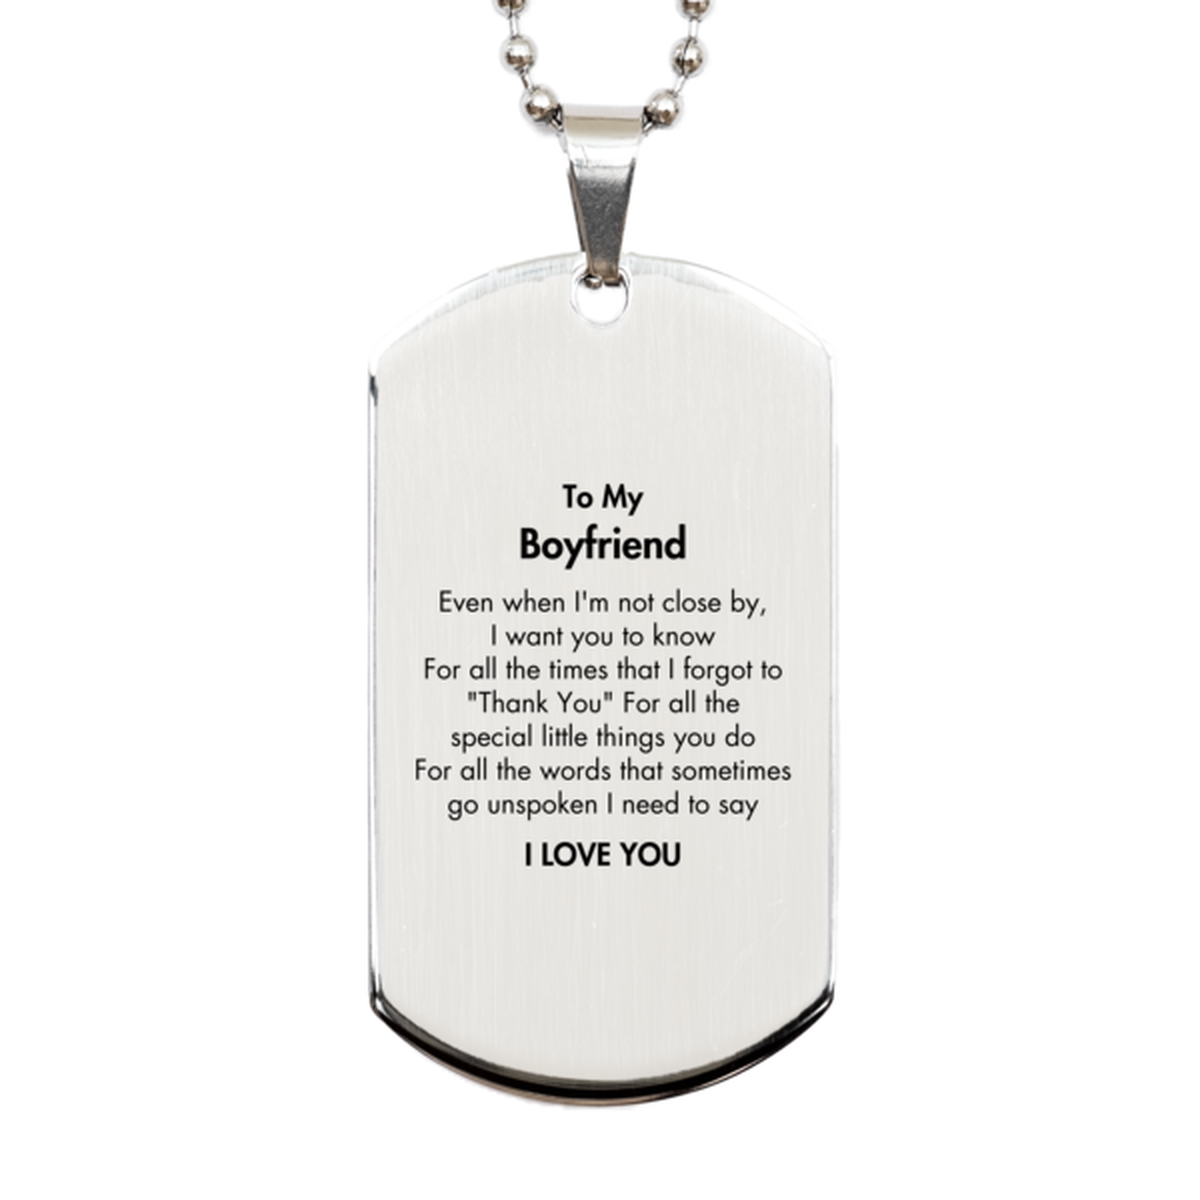 Thank You Gifts for Boyfriend, Keepsake Silver Dog Tag Gifts for Boyfriend Birthday Mother's day Father's Day Boyfriend For all the words That sometimes go unspoken I need to say I LOVE YOU